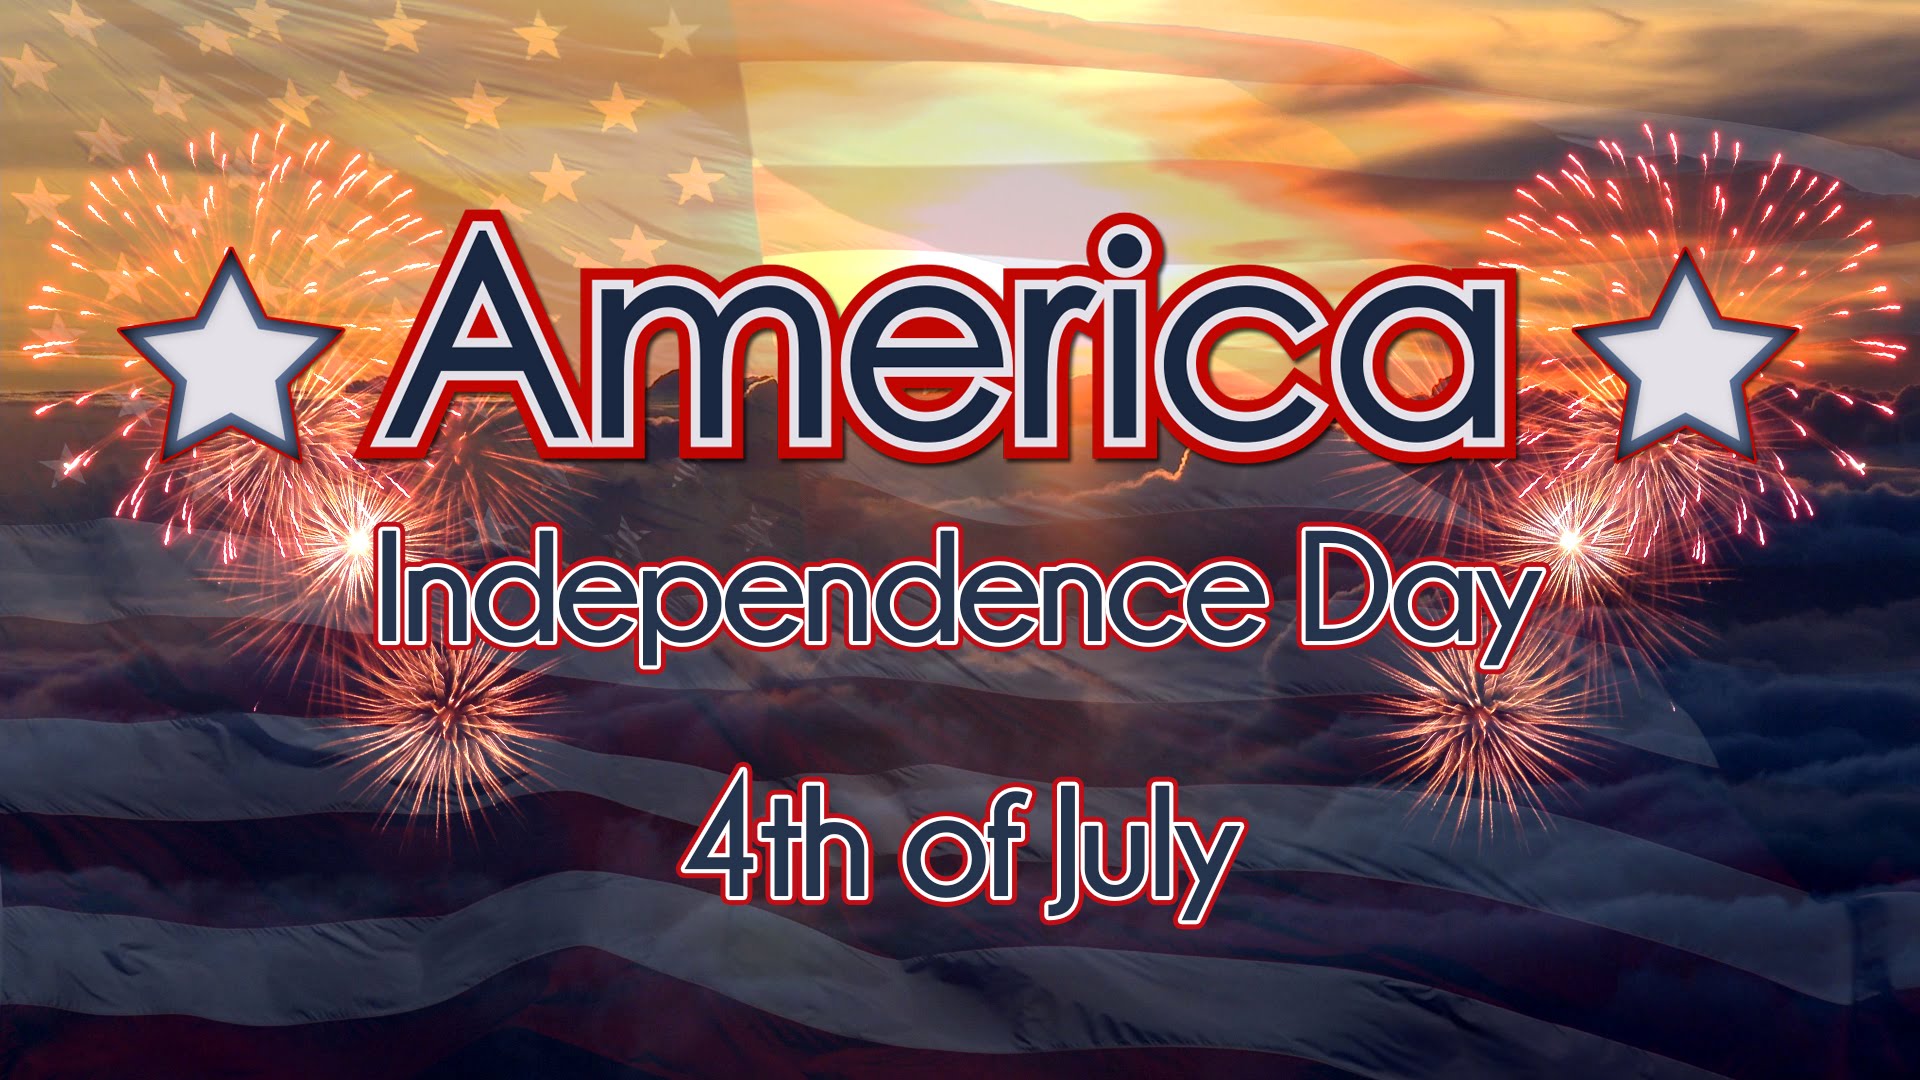 Essay on American Independence Day 4th July